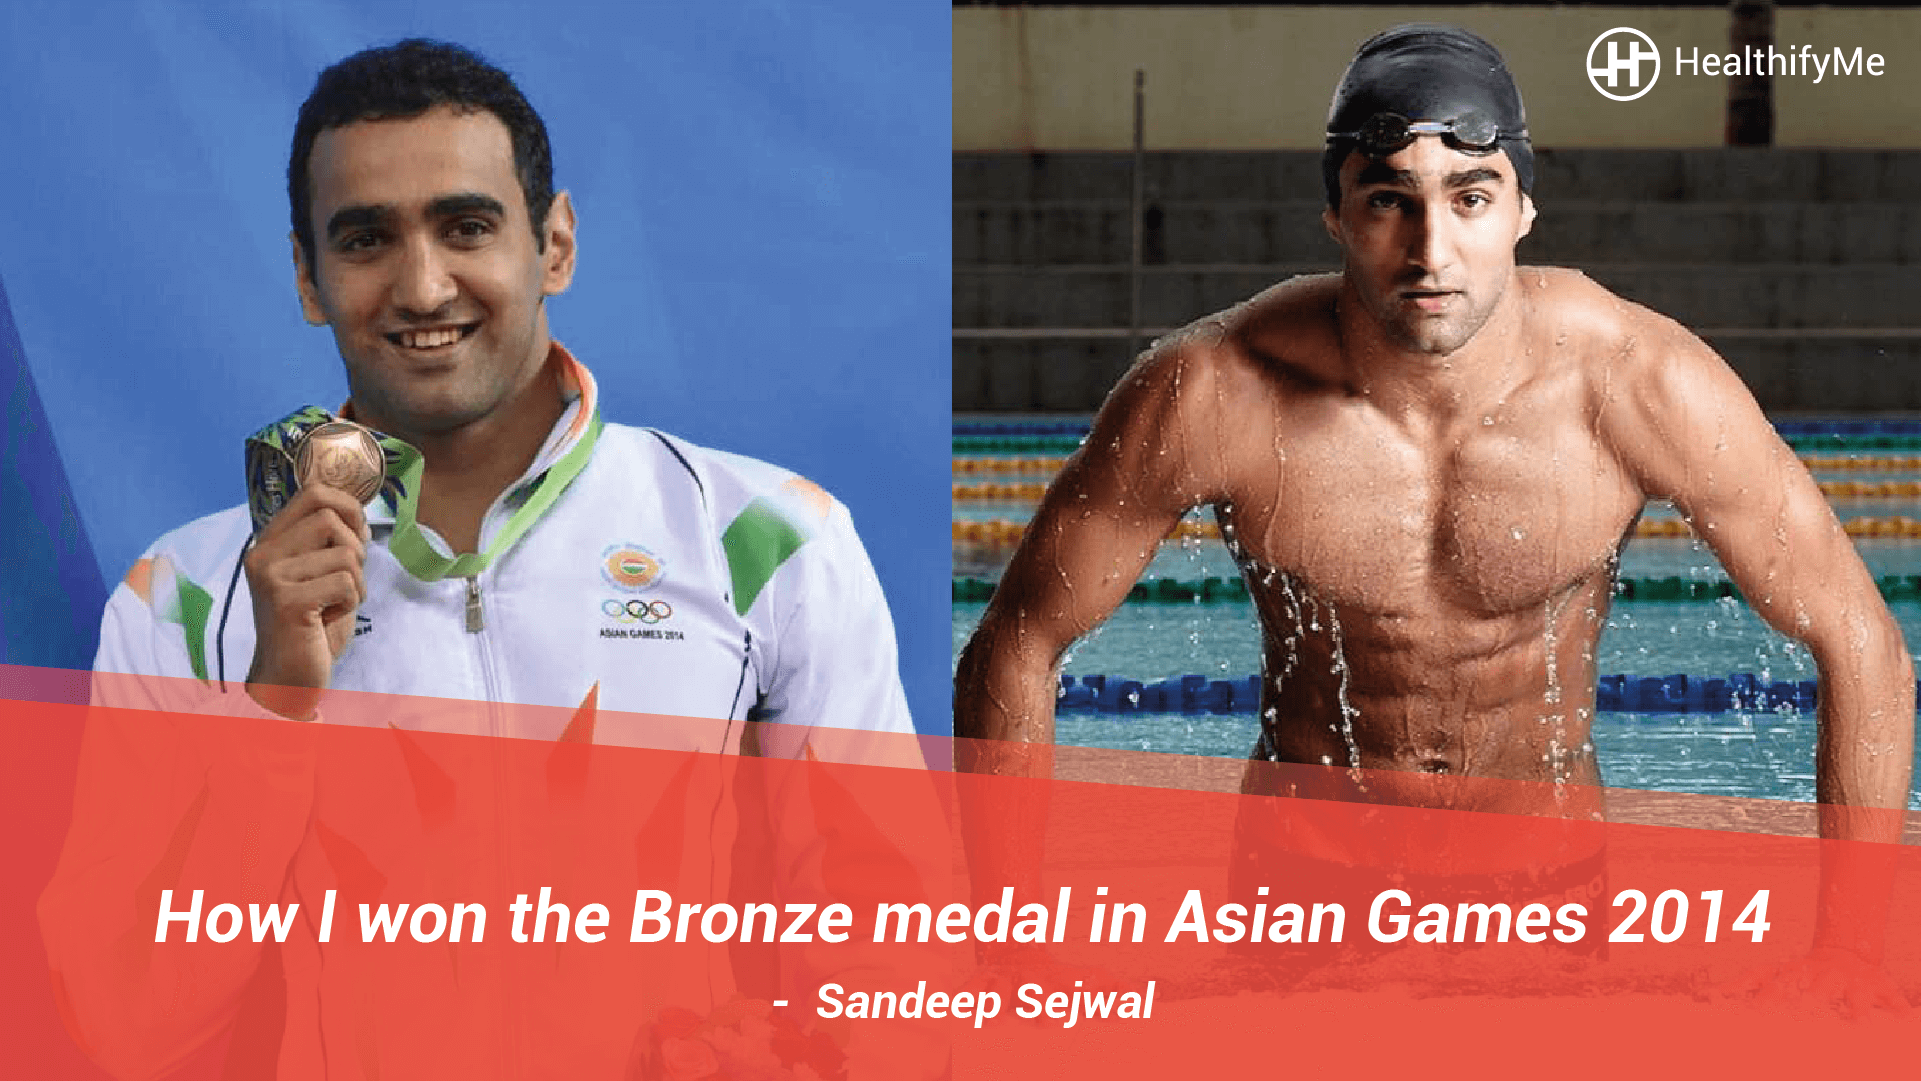 How I won the Bronze medal in the Asian Games- An interview with Sandeep Sejwal